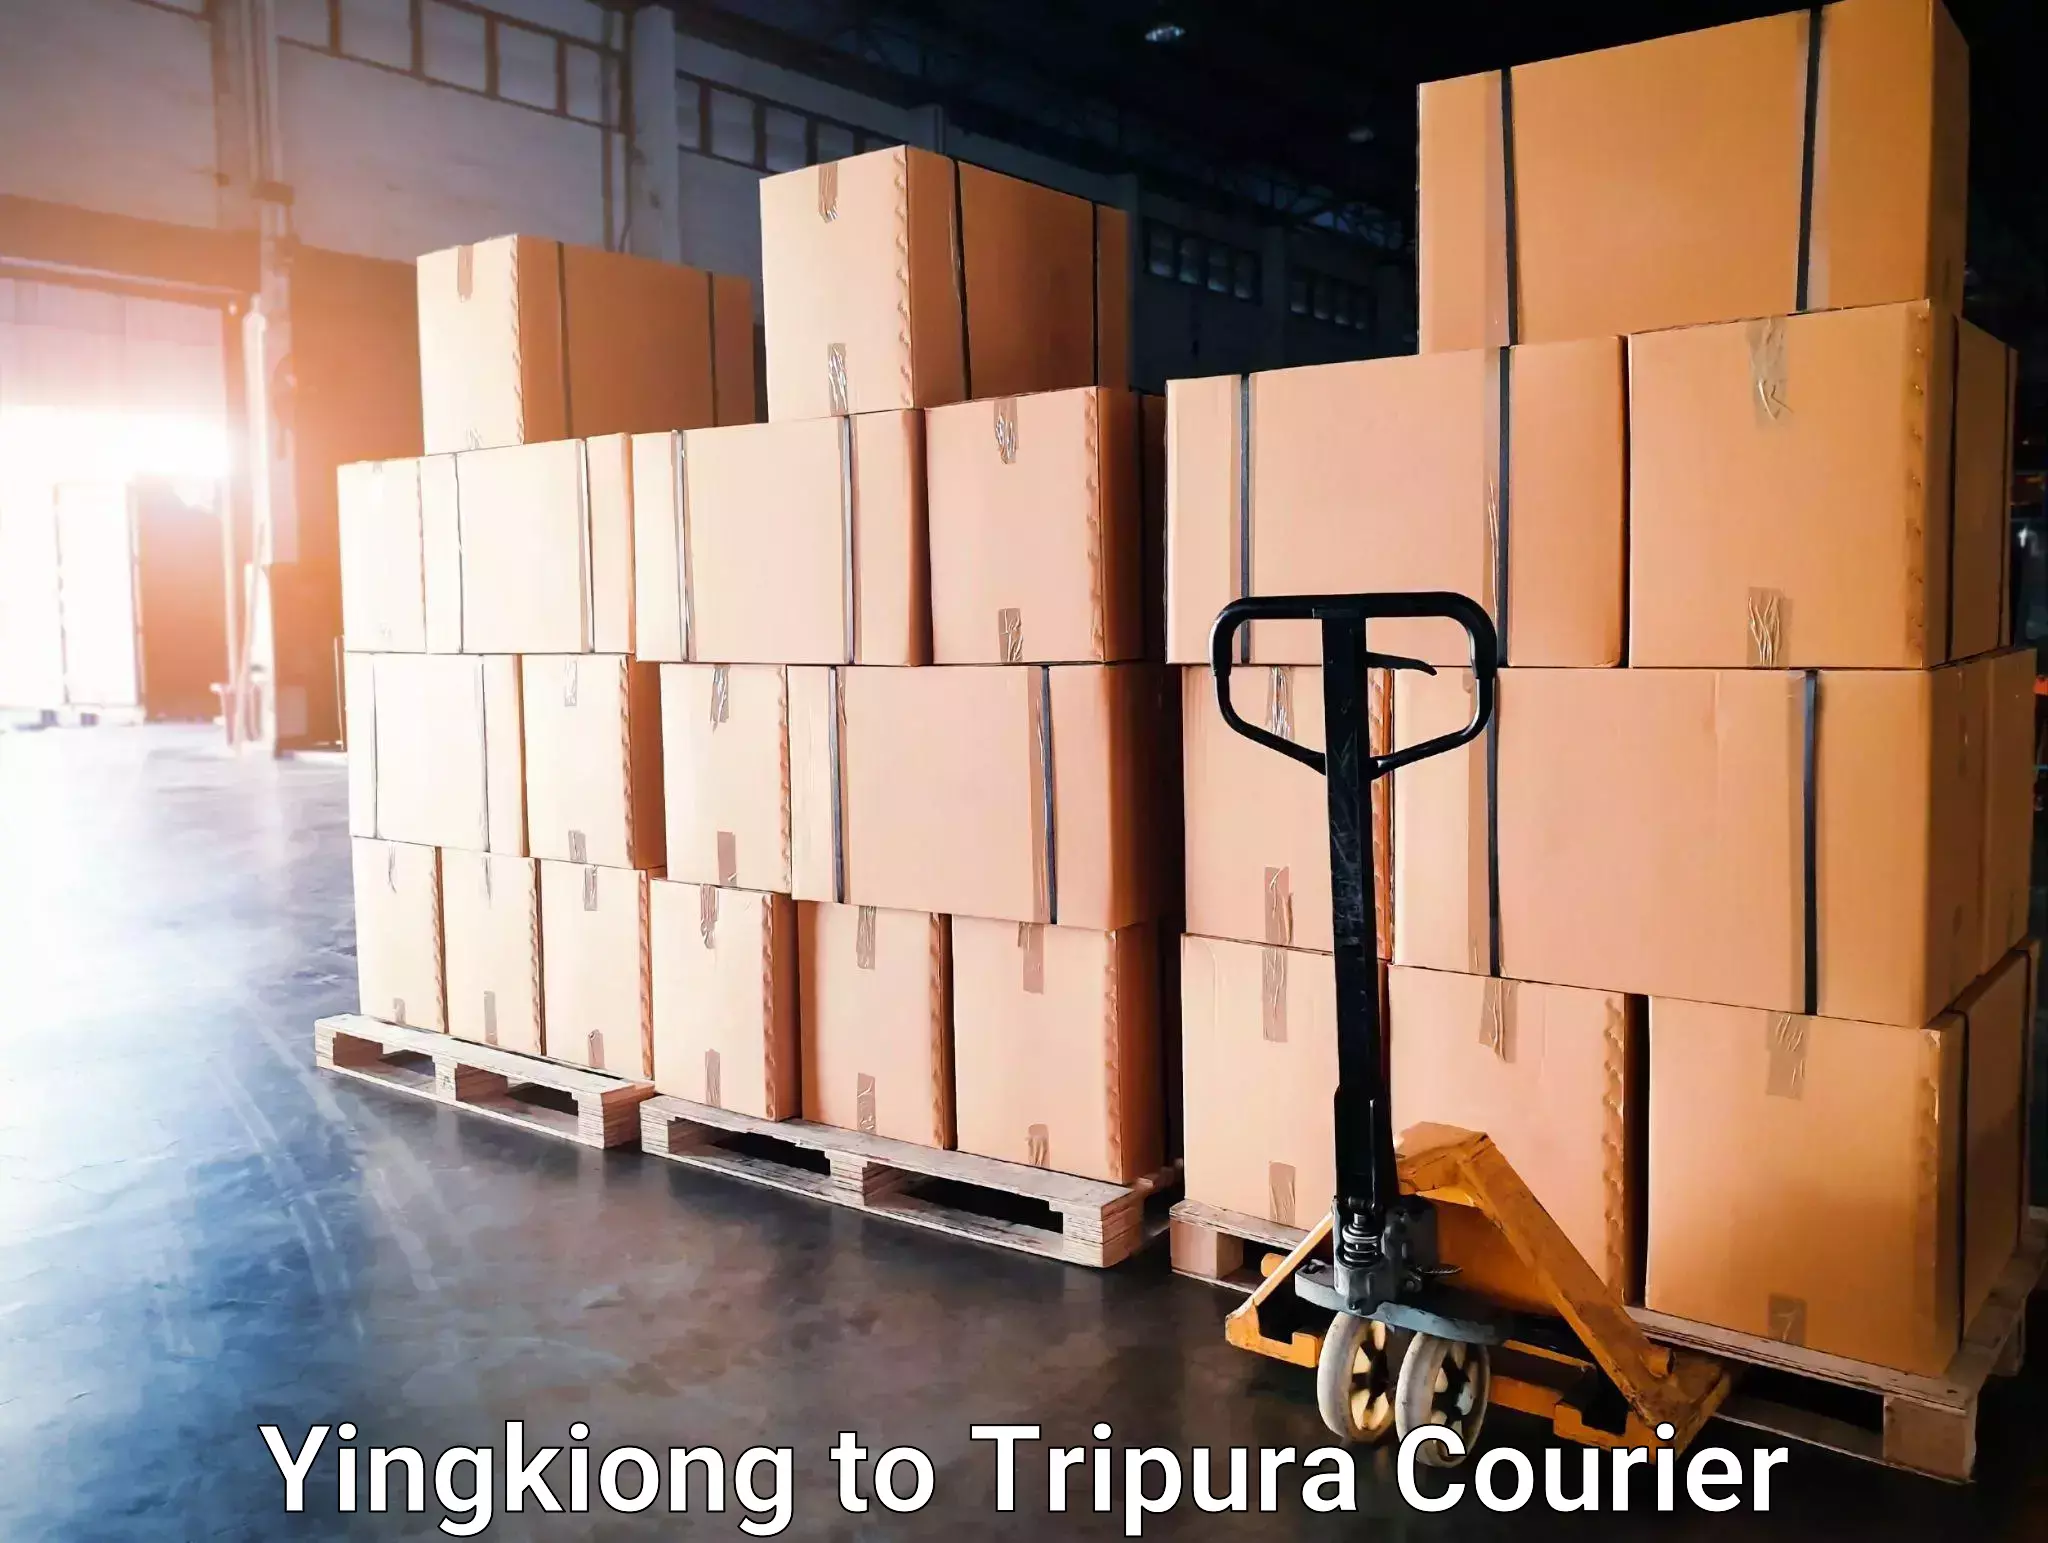 High-priority parcel service Yingkiong to West Tripura